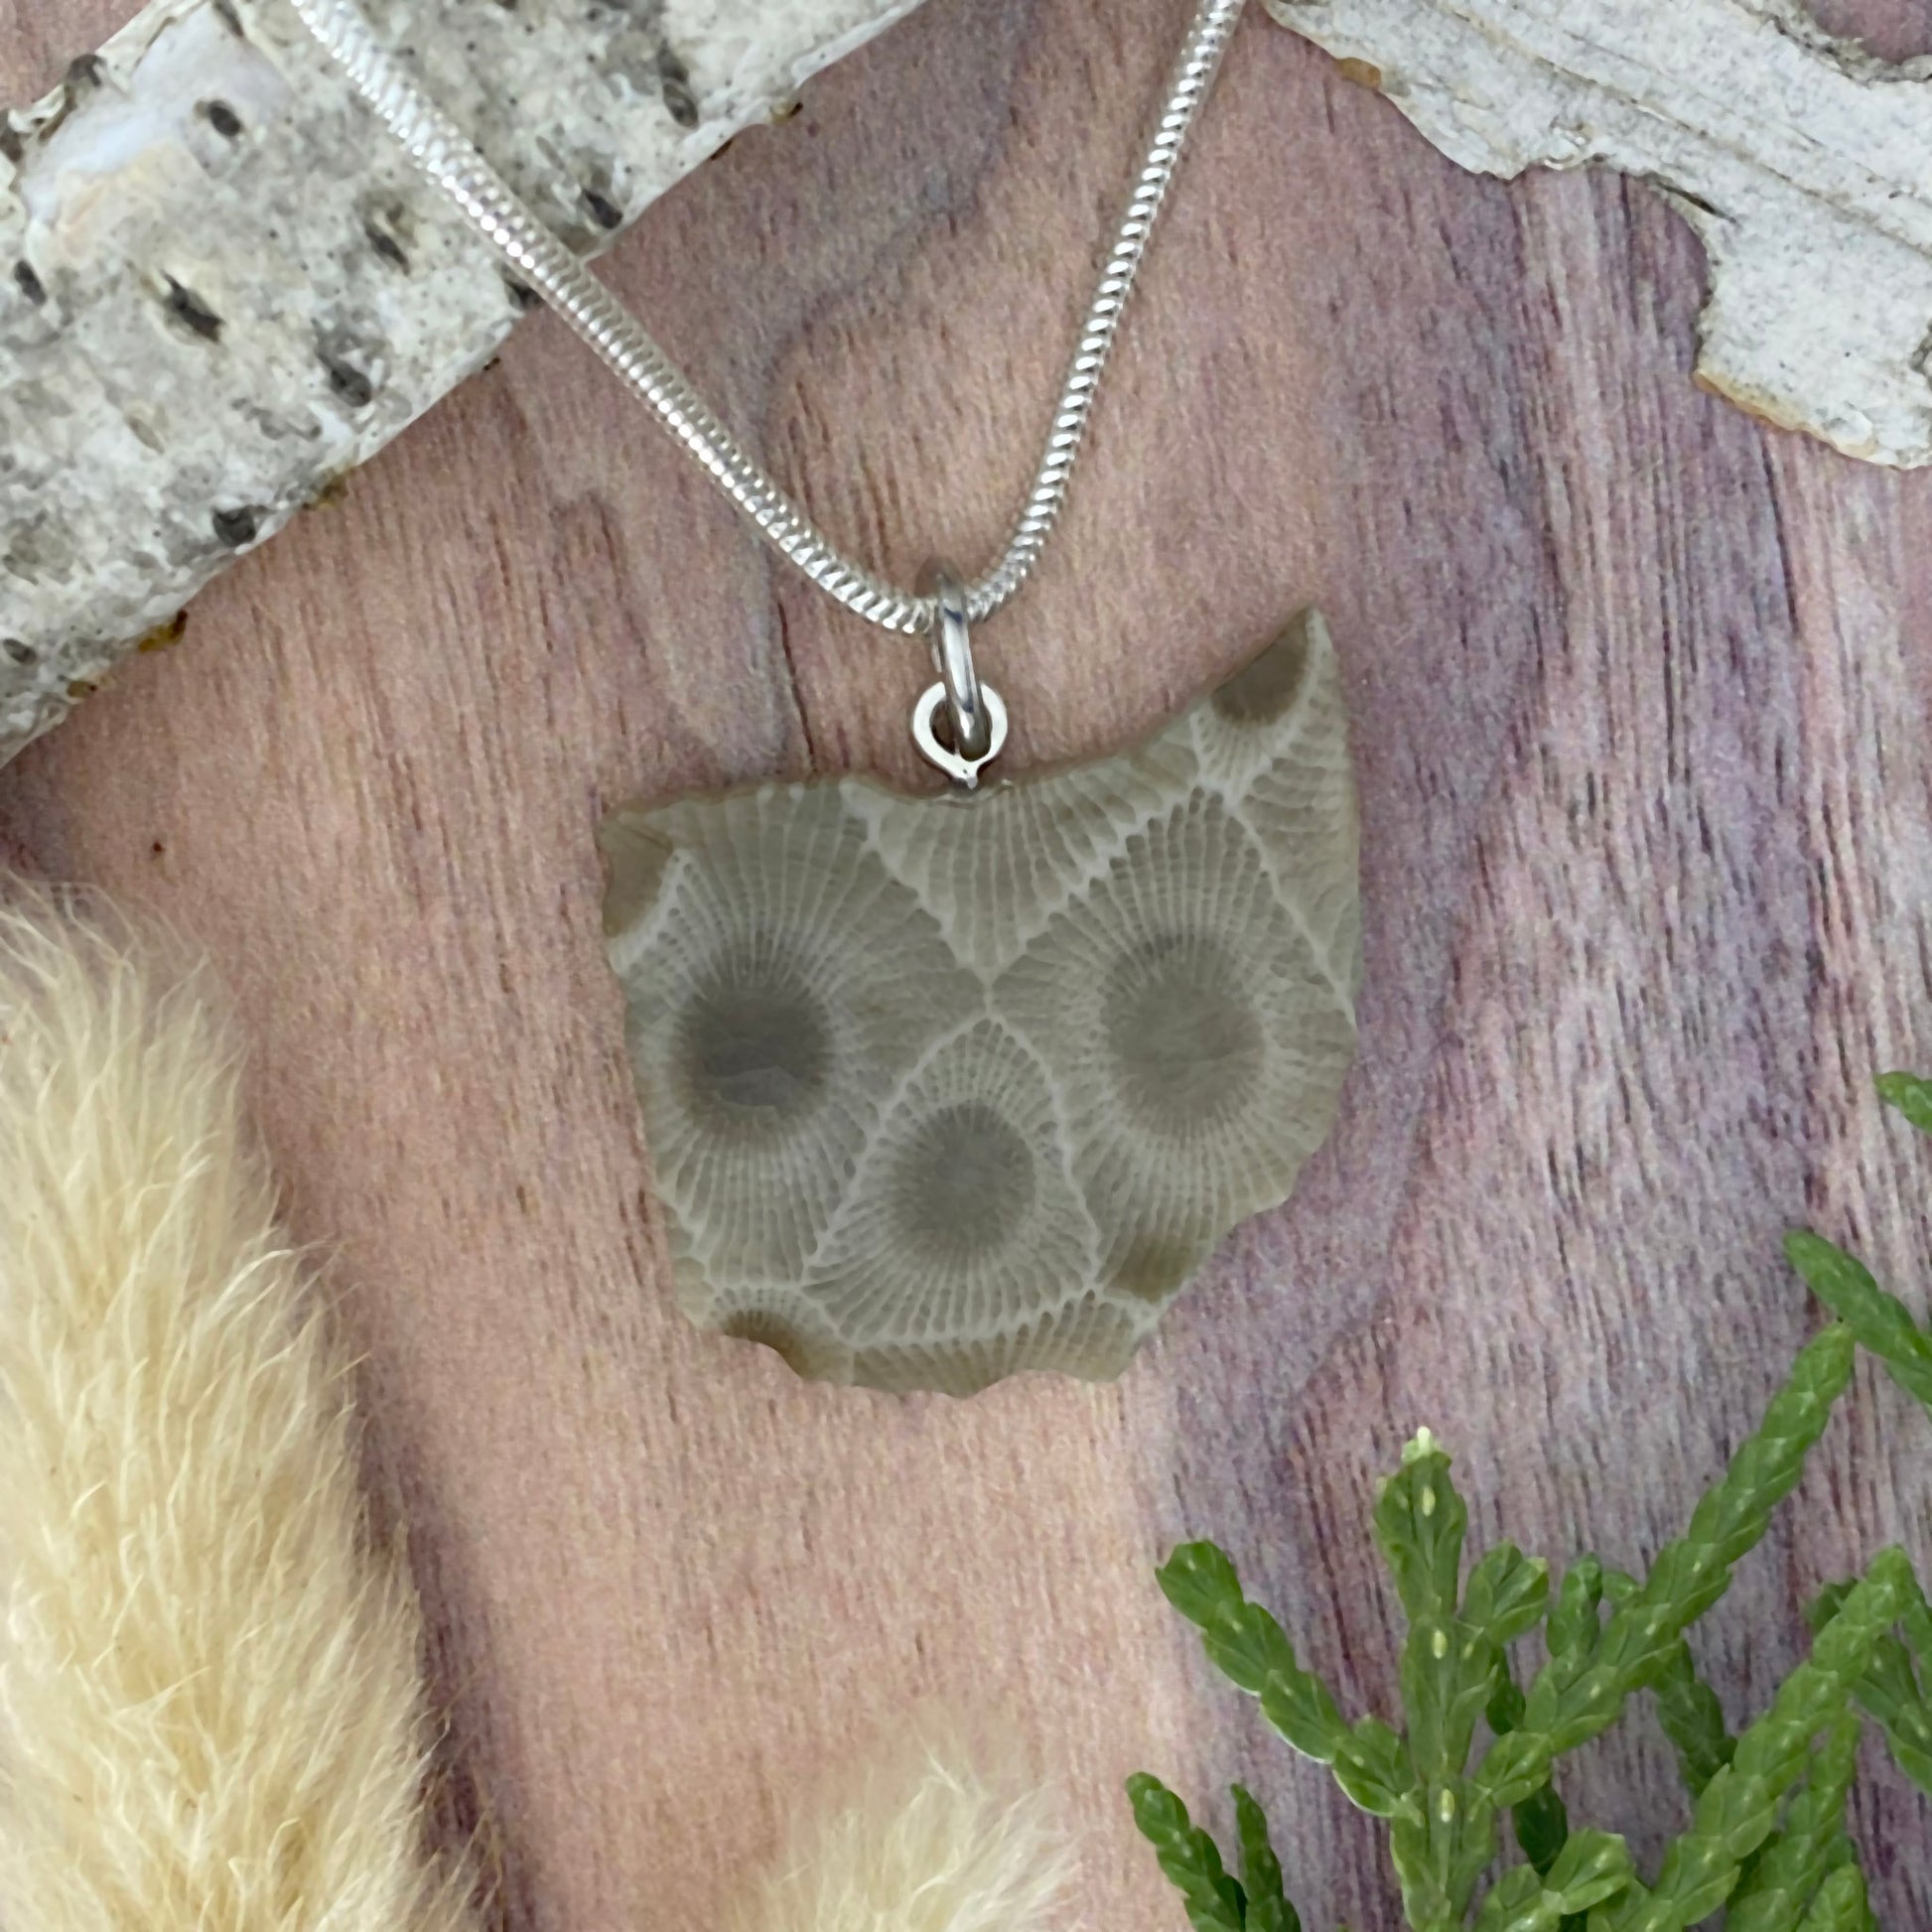 Ohio Petoskey Stone Pendant Necklace Front View - Stone Treasures by the Lake